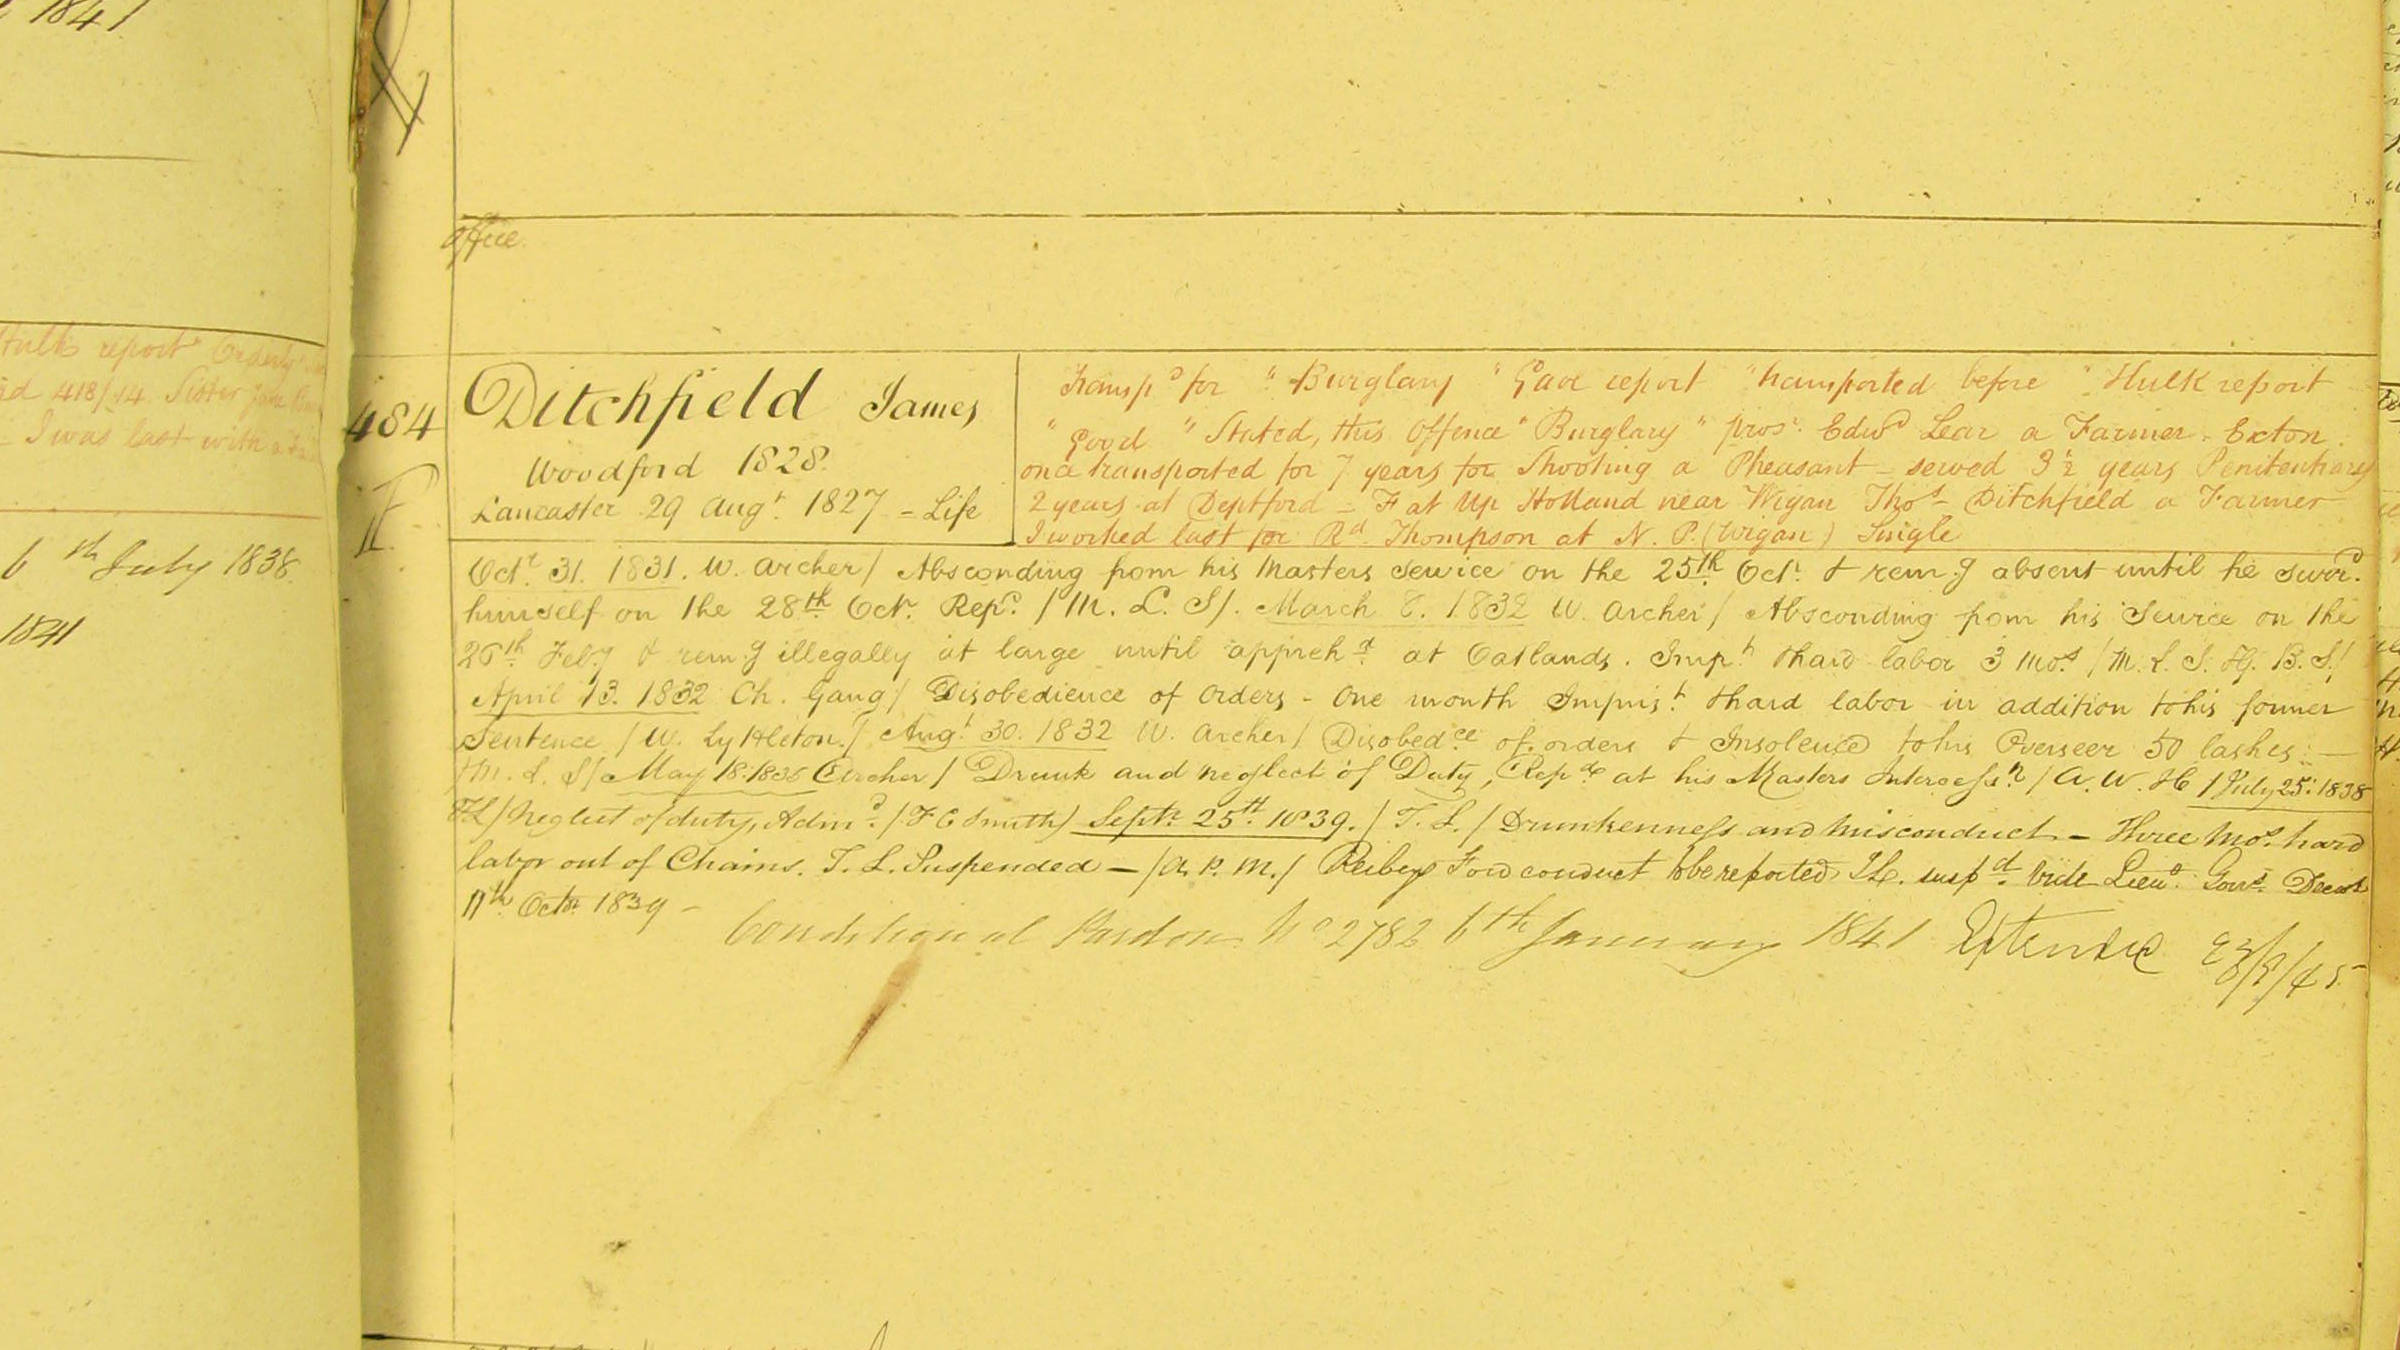 Excerpt from ledgers held as part of Brickendon Estate’s archives mentioning James Ditchfield.